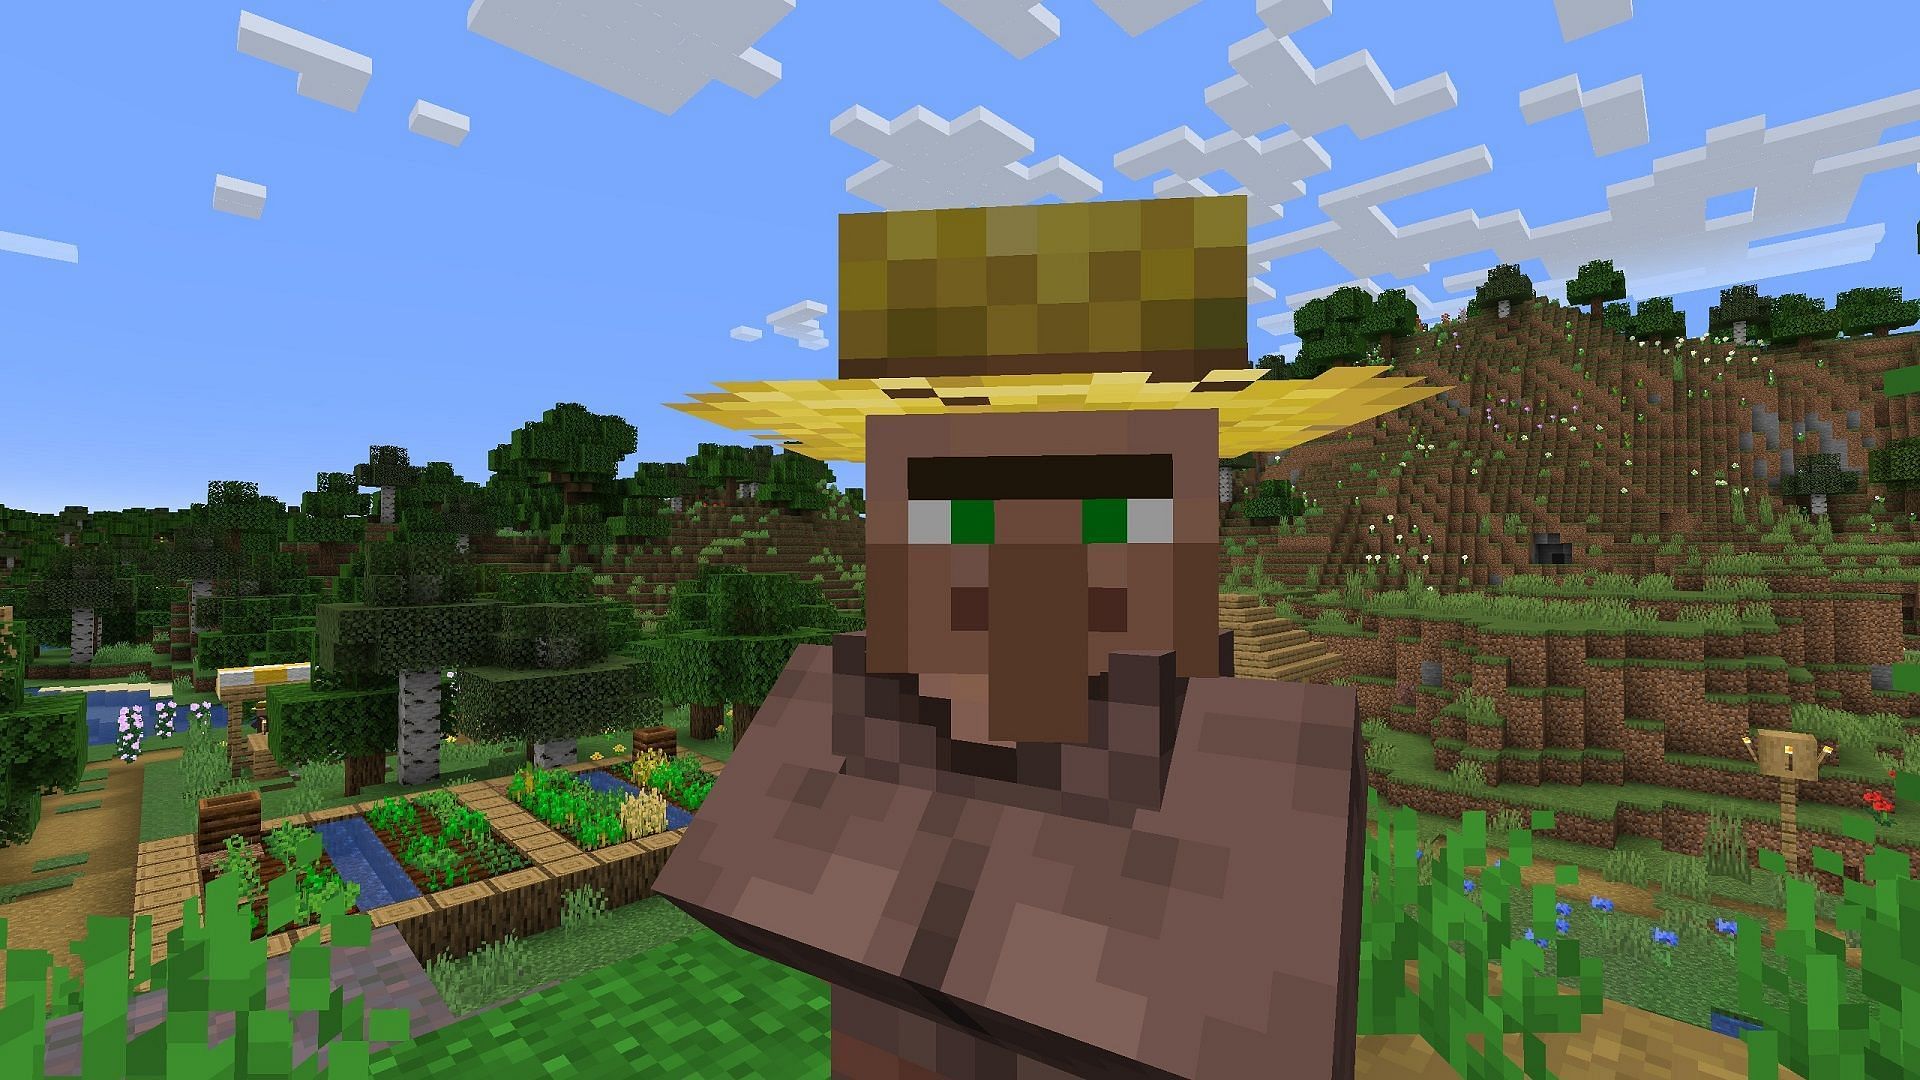 Village trading can lead to quick XP gains in Minecraft if used wisely (Image via Mojang)